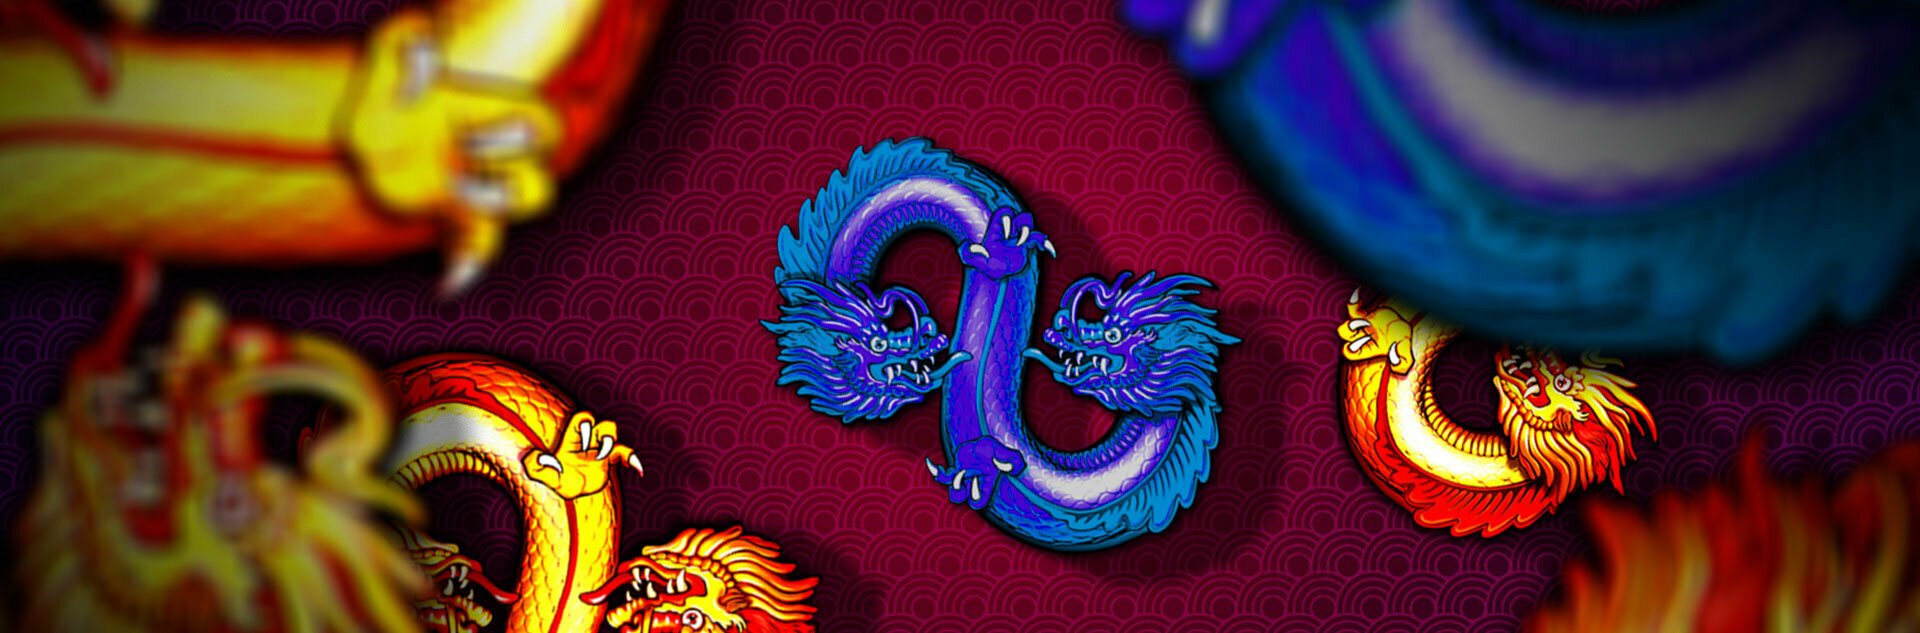 888 Dragons™ Free Spins